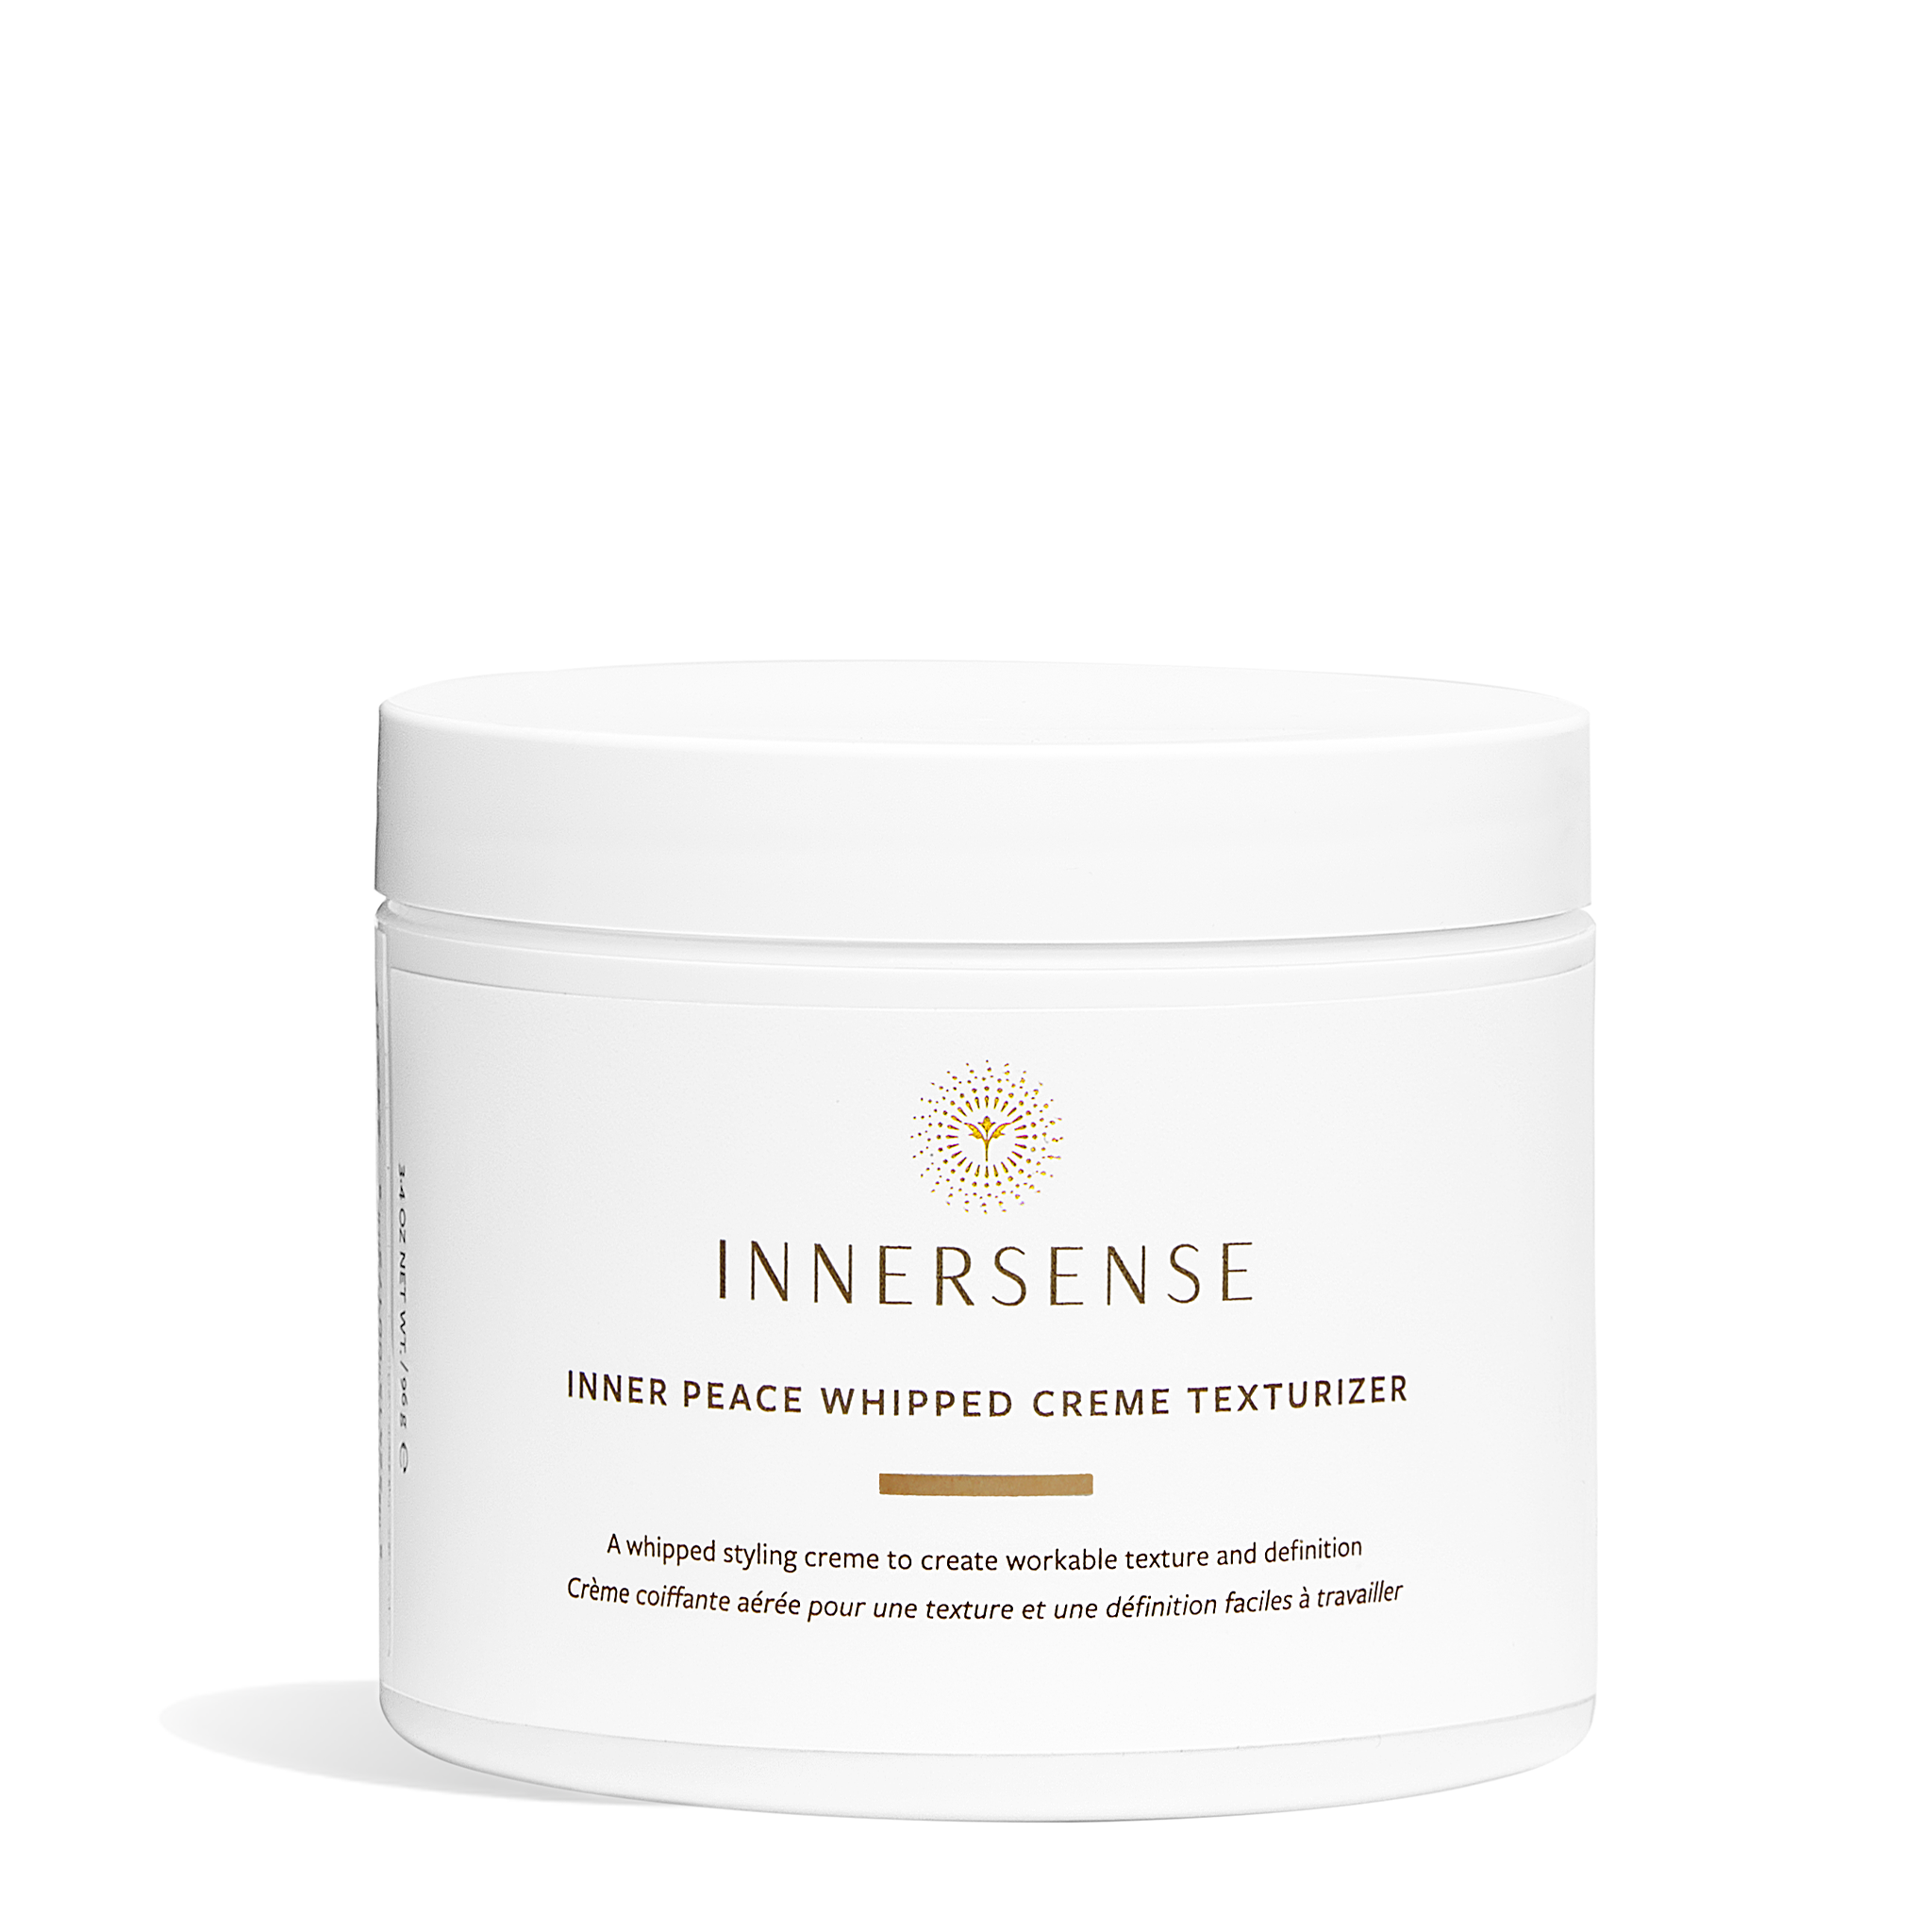 Inner Peace Whipped Creme Texturizer by Innersense